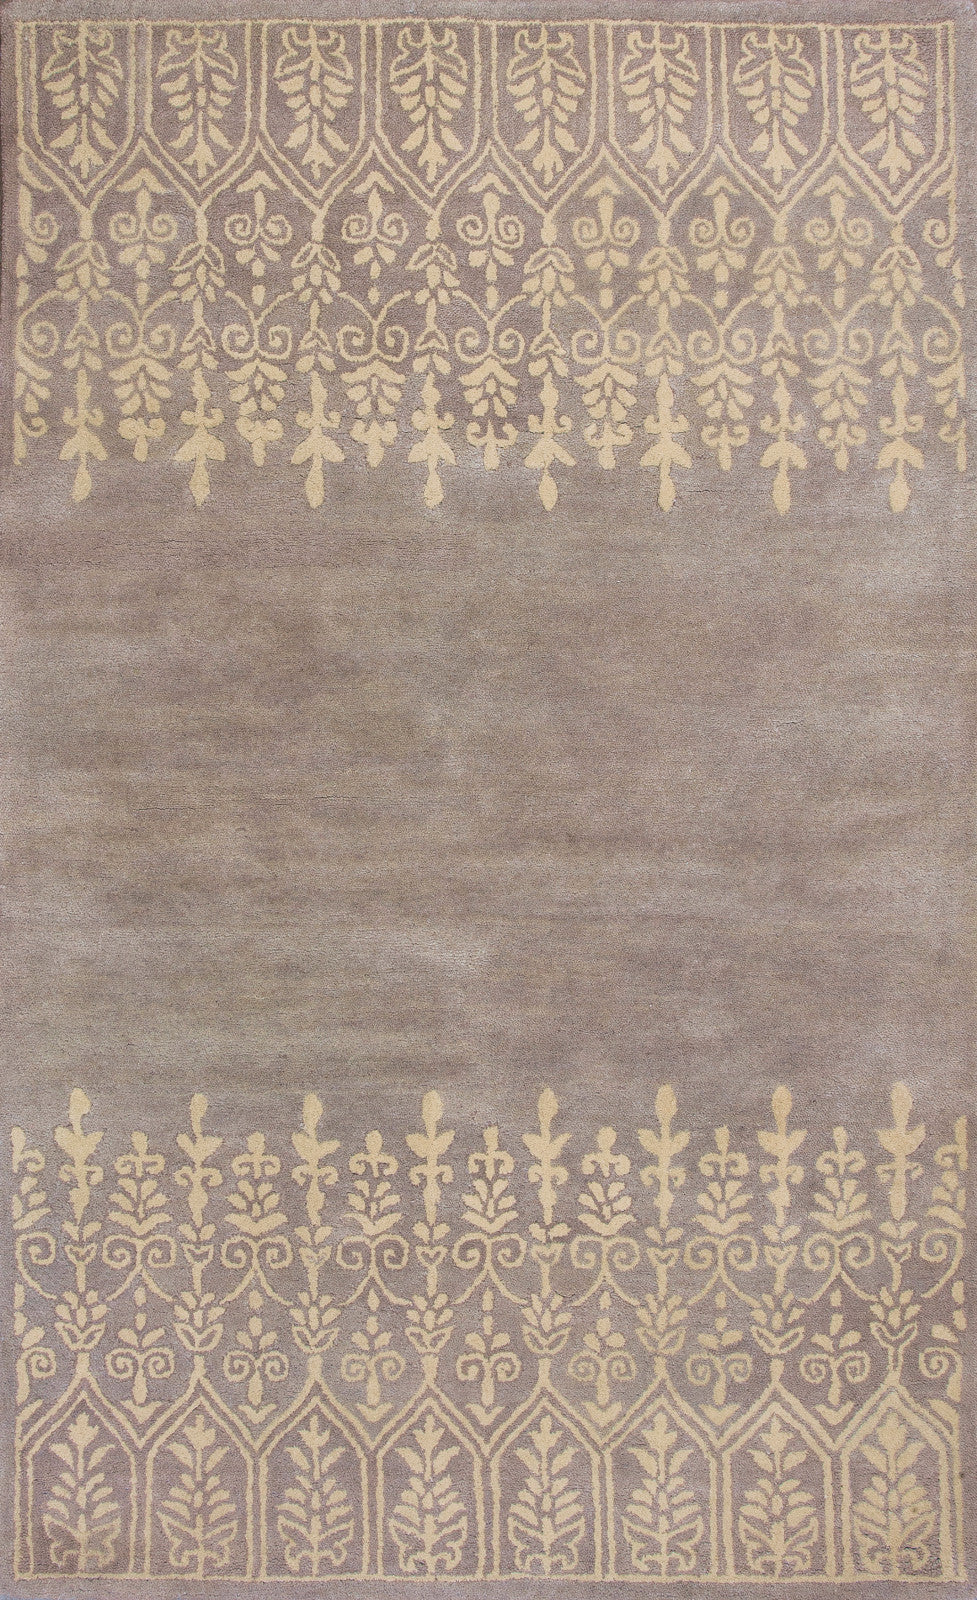 KAS Home Harmony 8109 Mist Traditions Hand Tufted Area Rug by Donny Osmond